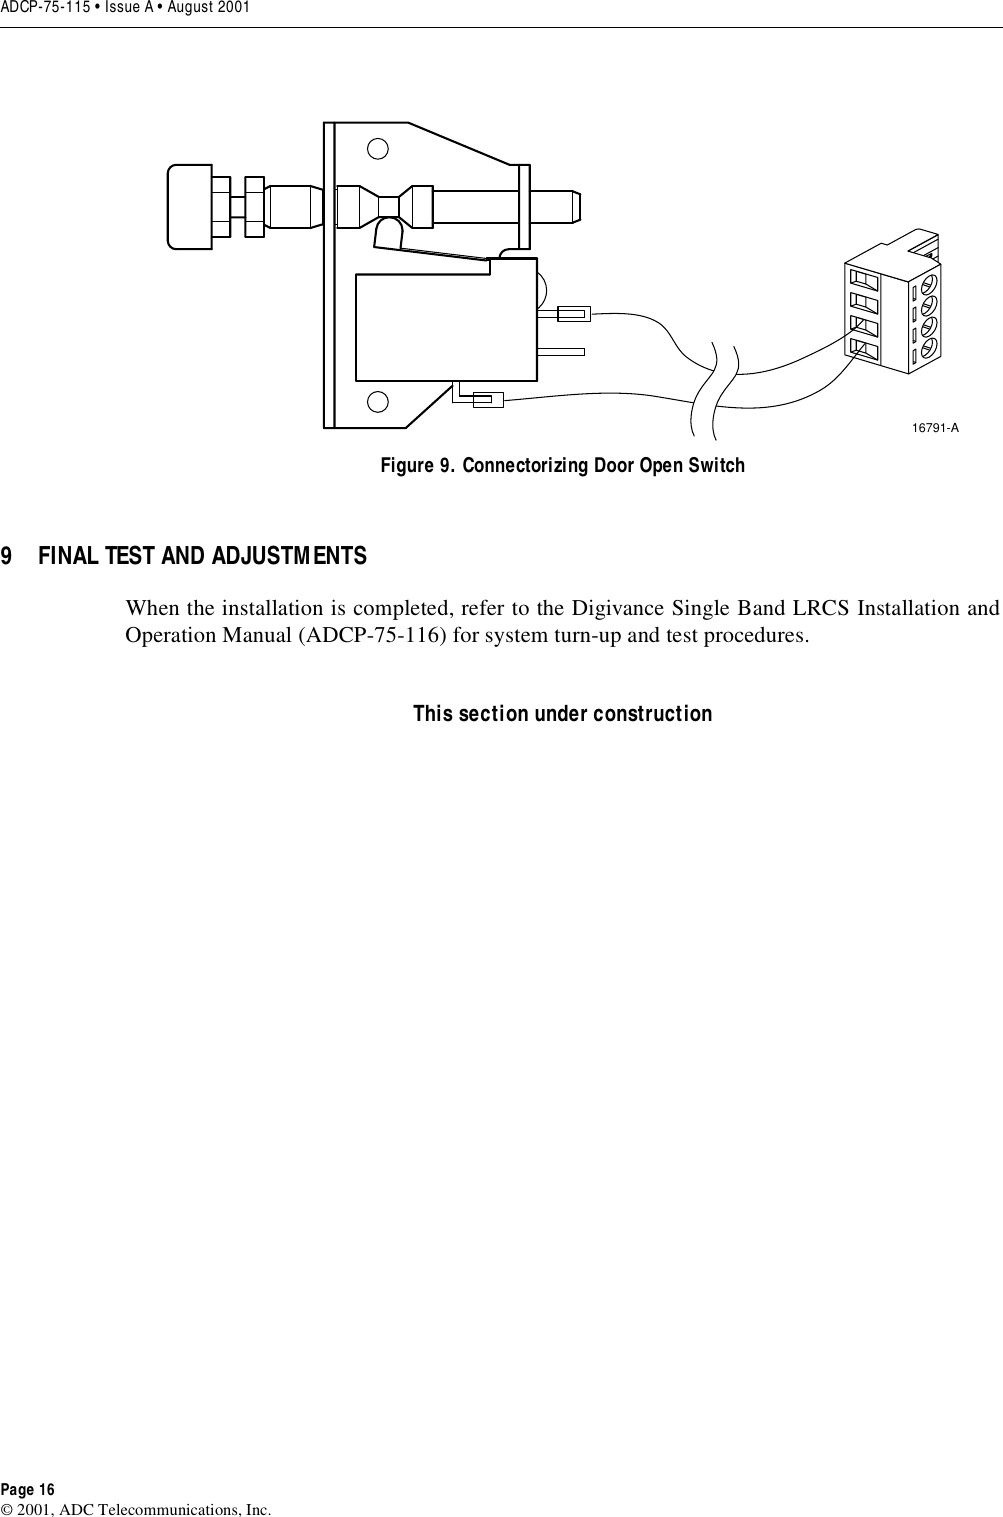 ADCP-75-115 • Issue A • August 2001Page 16©2001, ADC Telecommunications, Inc.Figure 9. Connectorizing Door Open Switch9 FINAL TEST AND ADJUSTMENTSWhen the installation is completed, refer to the Digivance Single Band LRCS Installation andOperation Manual (ADCP-75-116) for system turn-up and test procedures.This section under construction16791-A